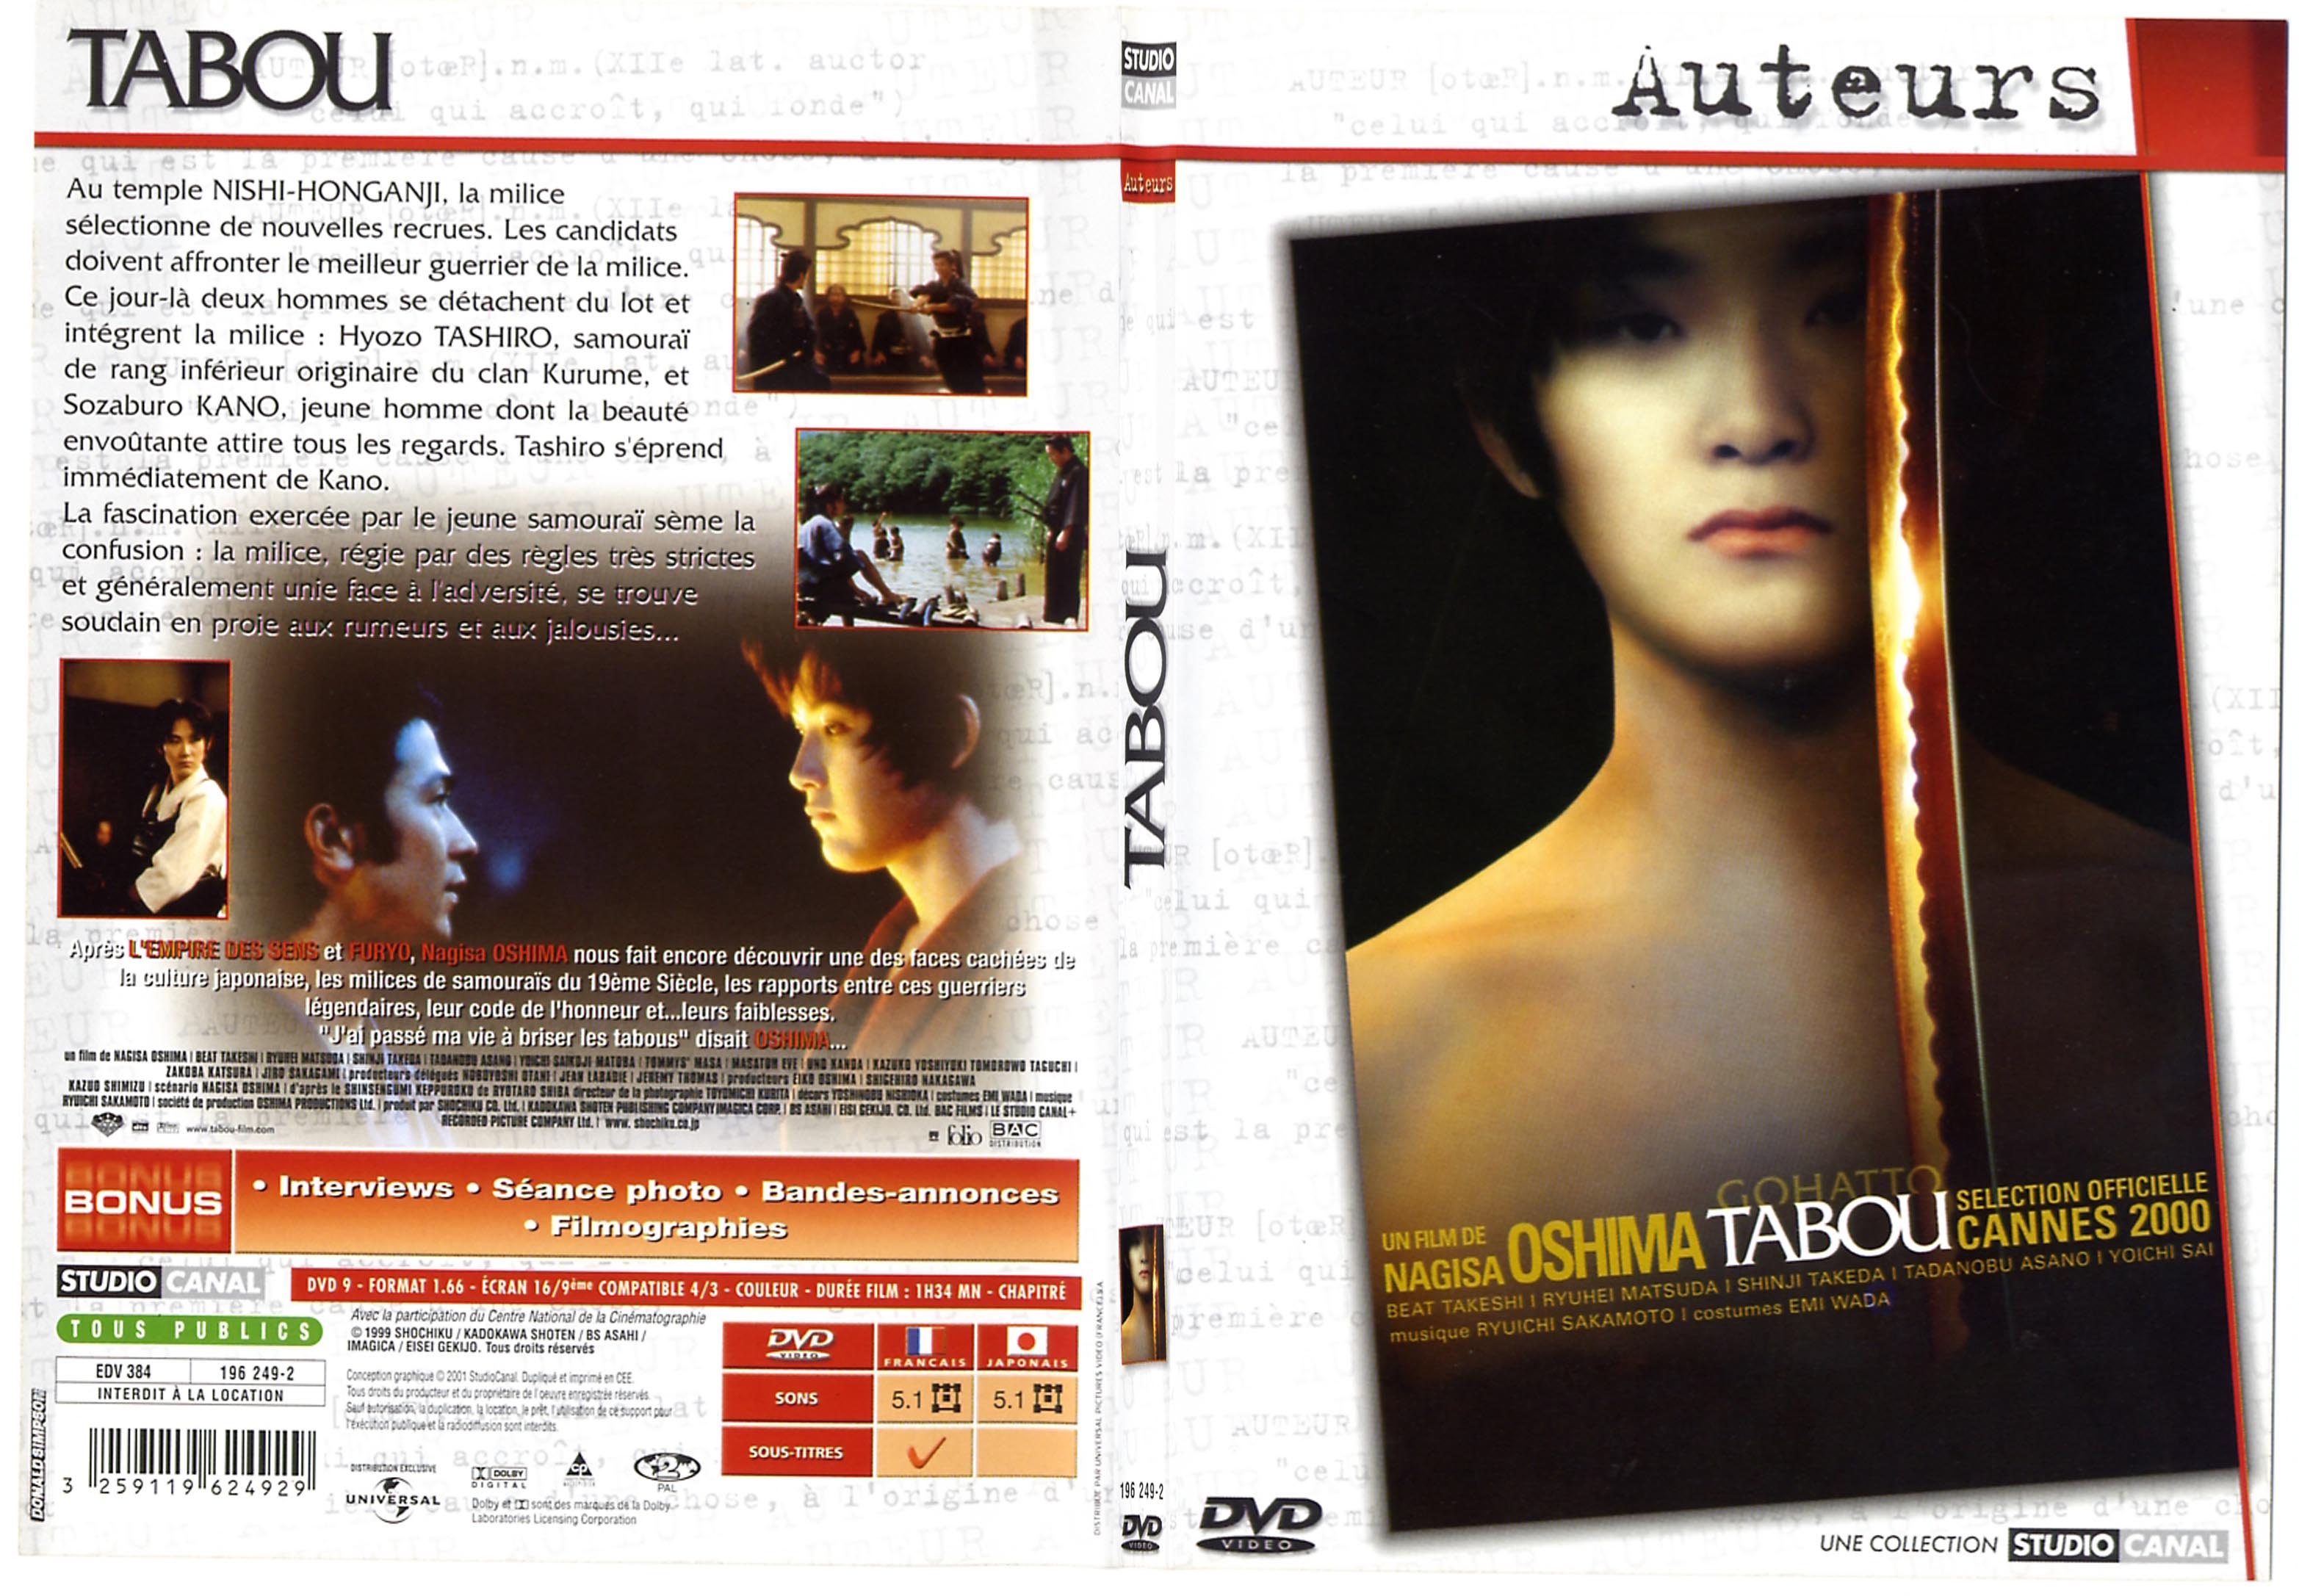 Jaquette DVD Tabou - SLIM